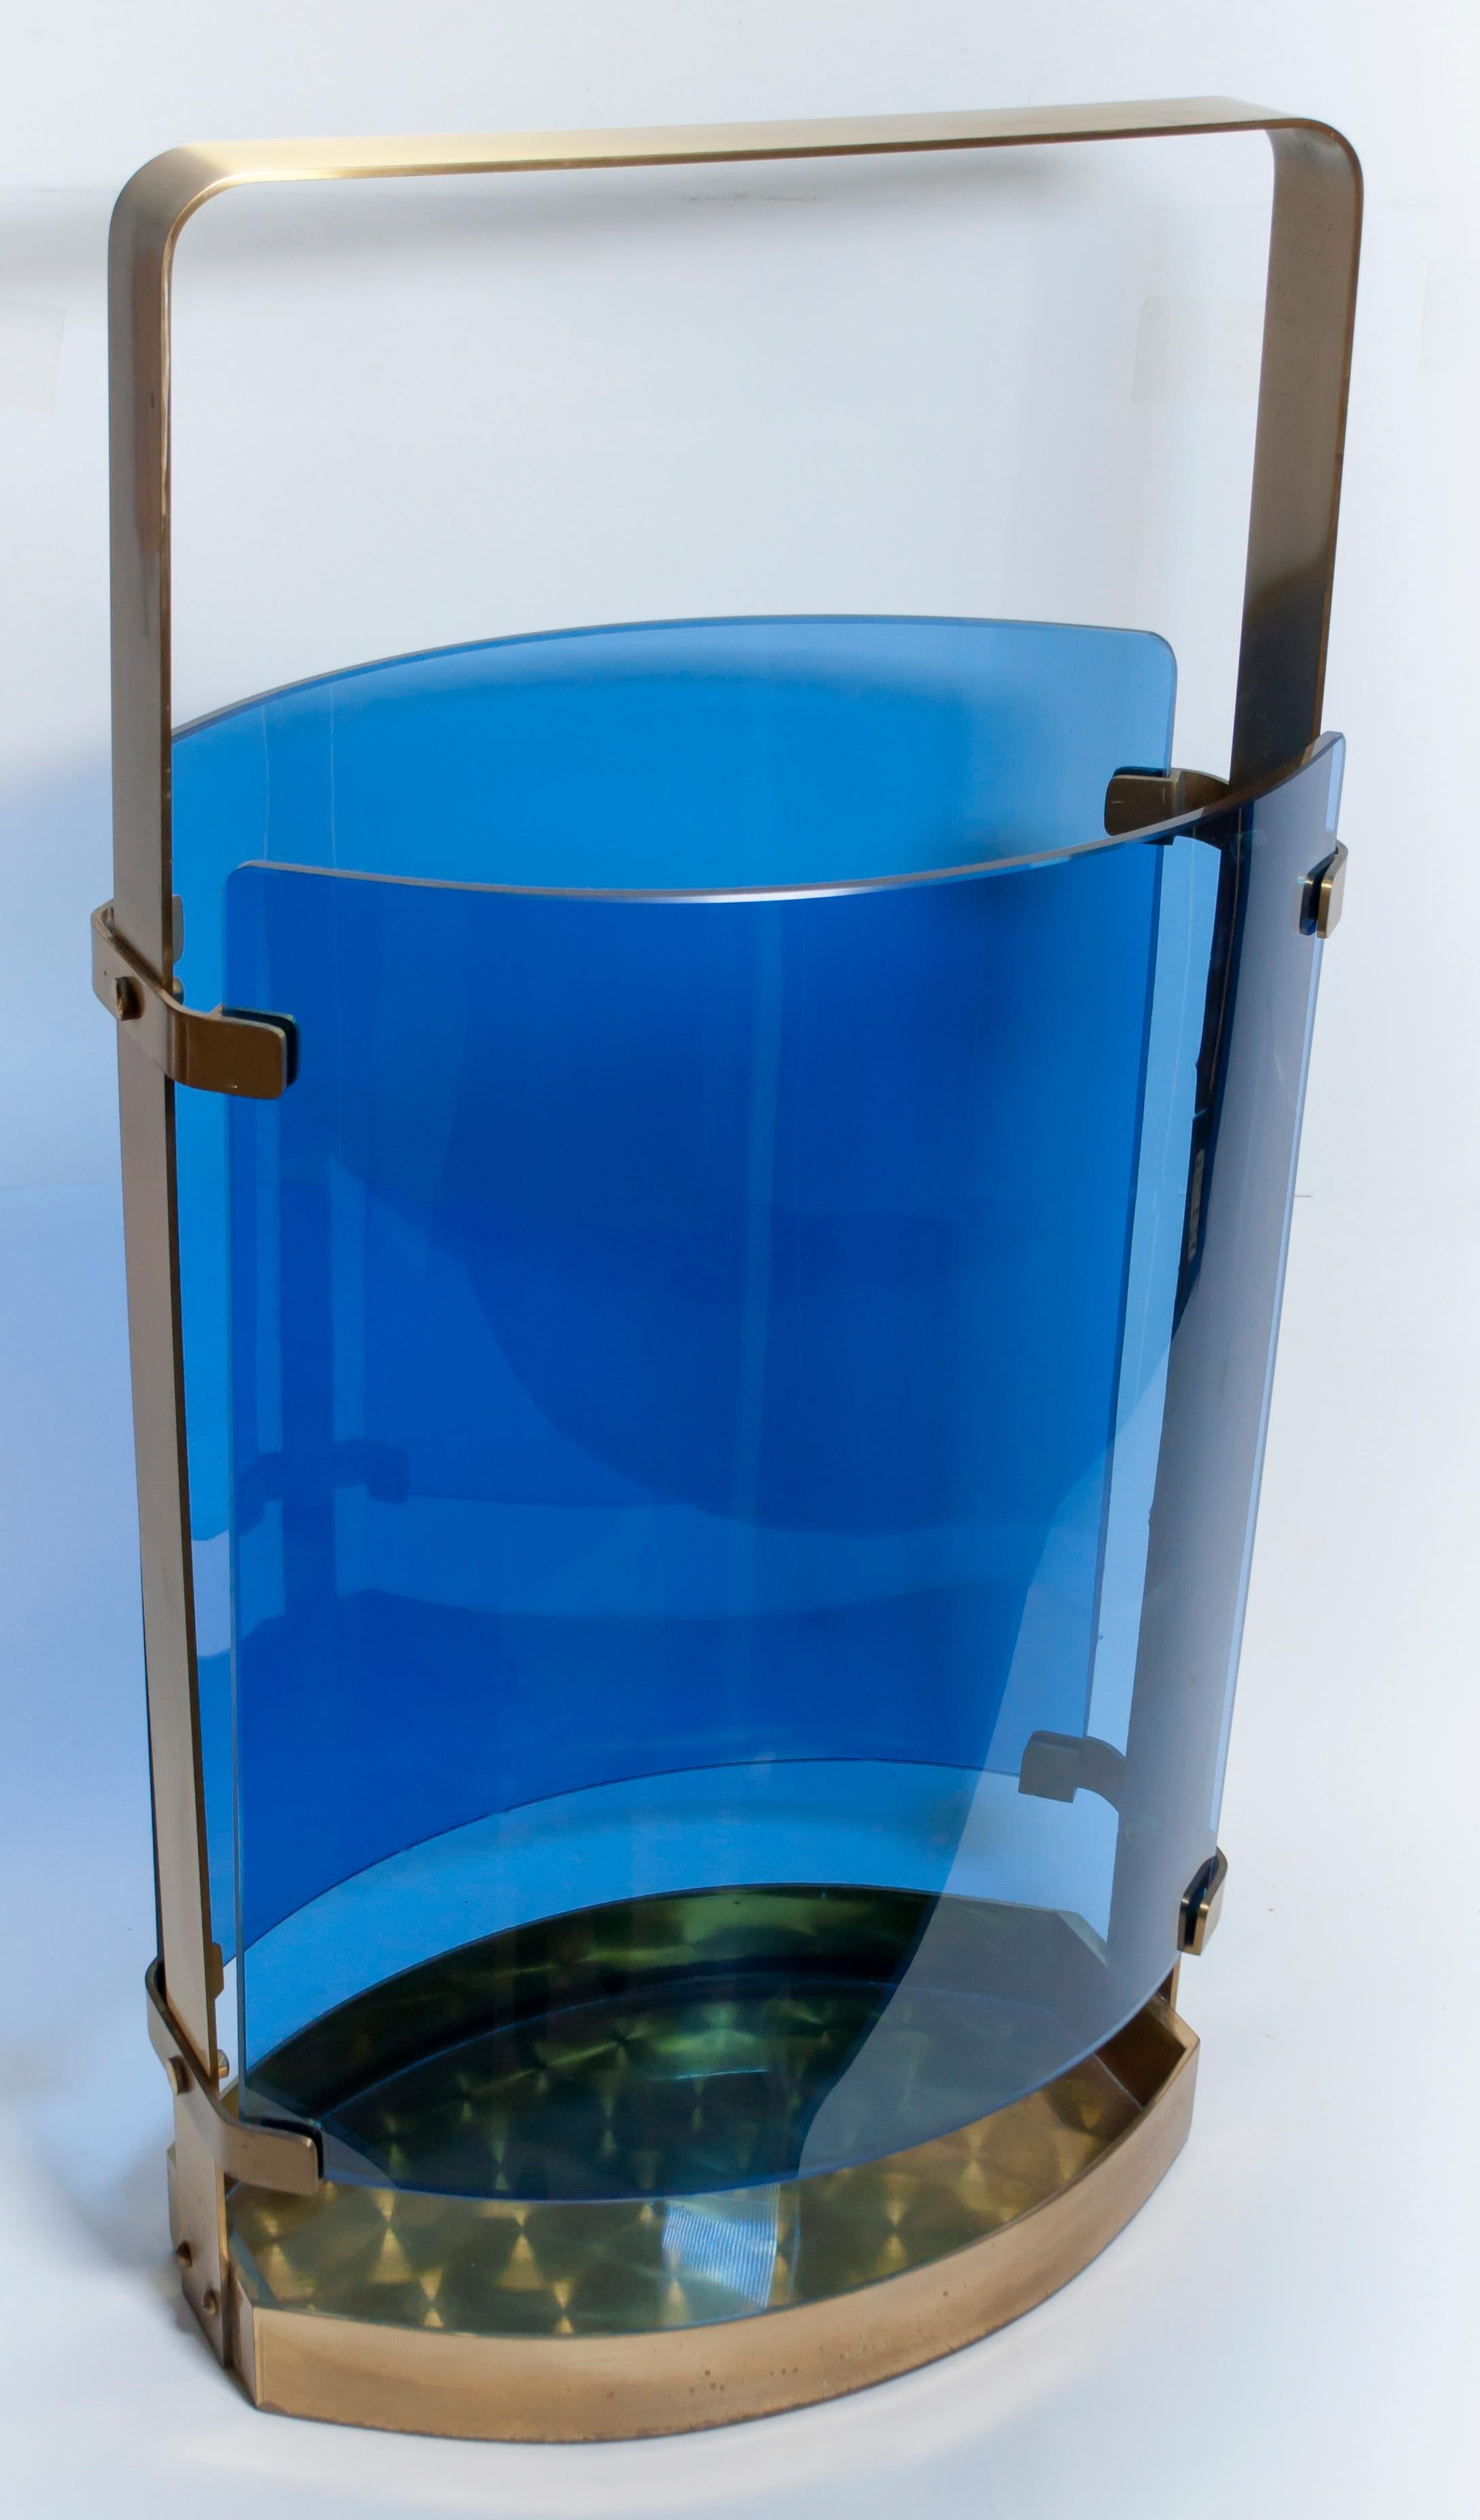 This umbrella stand in blue bent glass and polished brass, was designed by Max Ingrand for Fontana Arte, produced in the early 1960s in Italy.

Max Ingrand; 2035A Brass and Glass Umbrella Stand for Fontana Arte, 1964.

Max Ingrand, whose full name